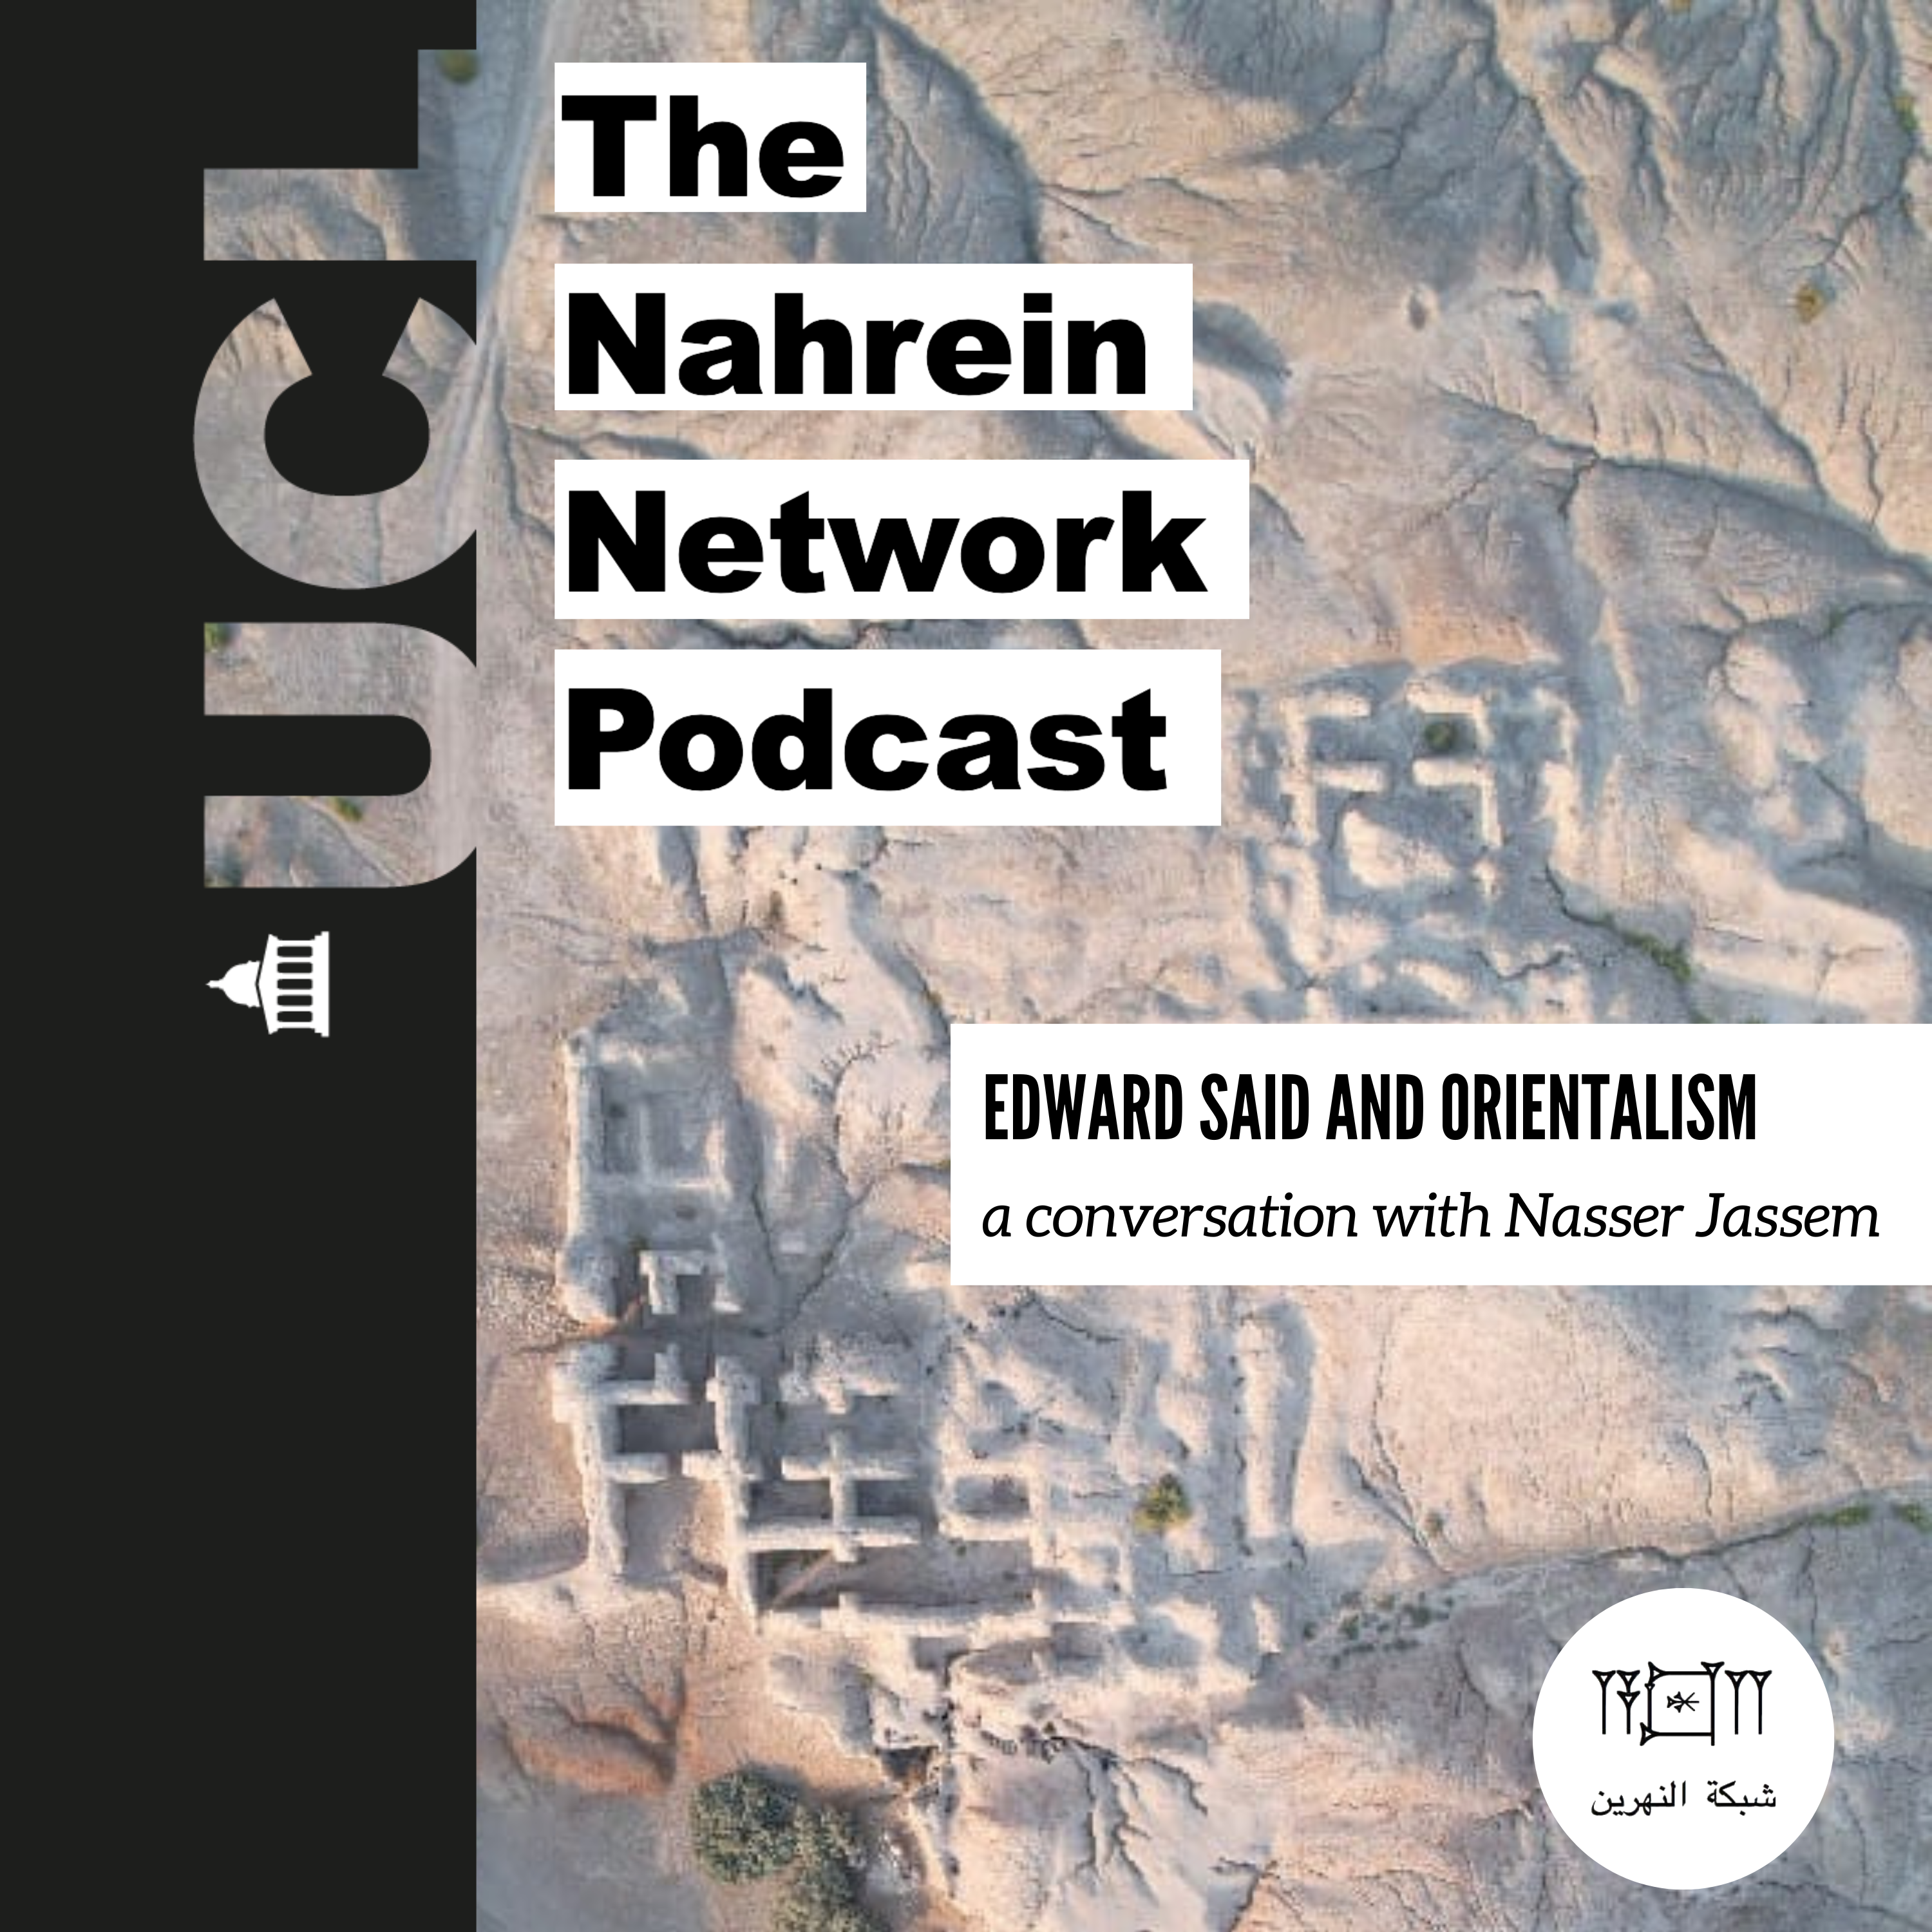 Podcast interview with Nasser